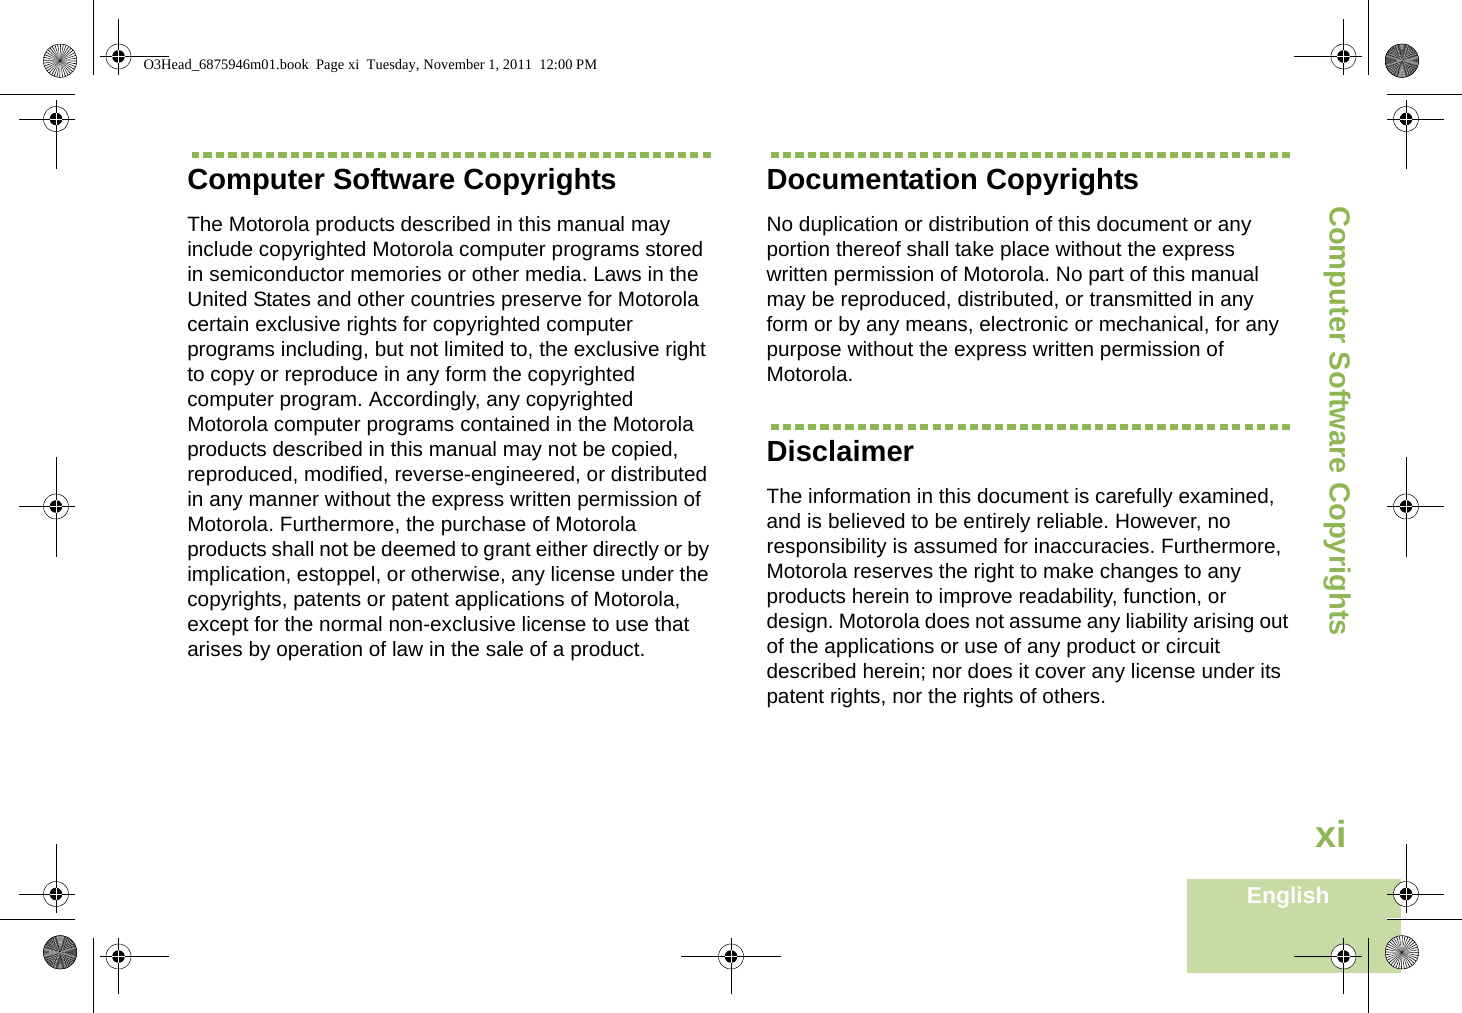 Computer Software CopyrightsEnglishxiComputer Software CopyrightsThe Motorola products described in this manual may include copyrighted Motorola computer programs stored in semiconductor memories or other media. Laws in the United States and other countries preserve for Motorola certain exclusive rights for copyrighted computer programs including, but not limited to, the exclusive right to copy or reproduce in any form the copyrighted computer program. Accordingly, any copyrighted Motorola computer programs contained in the Motorola products described in this manual may not be copied, reproduced, modified, reverse-engineered, or distributed in any manner without the express written permission of Motorola. Furthermore, the purchase of Motorola products shall not be deemed to grant either directly or by implication, estoppel, or otherwise, any license under the copyrights, patents or patent applications of Motorola, except for the normal non-exclusive license to use that arises by operation of law in the sale of a product.Documentation CopyrightsNo duplication or distribution of this document or any portion thereof shall take place without the express written permission of Motorola. No part of this manual may be reproduced, distributed, or transmitted in any form or by any means, electronic or mechanical, for any purpose without the express written permission of Motorola.DisclaimerThe information in this document is carefully examined, and is believed to be entirely reliable. However, no responsibility is assumed for inaccuracies. Furthermore, Motorola reserves the right to make changes to any products herein to improve readability, function, or design. Motorola does not assume any liability arising out of the applications or use of any product or circuit described herein; nor does it cover any license under its patent rights, nor the rights of others. O3Head_6875946m01.book  Page xi  Tuesday, November 1, 2011  12:00 PM